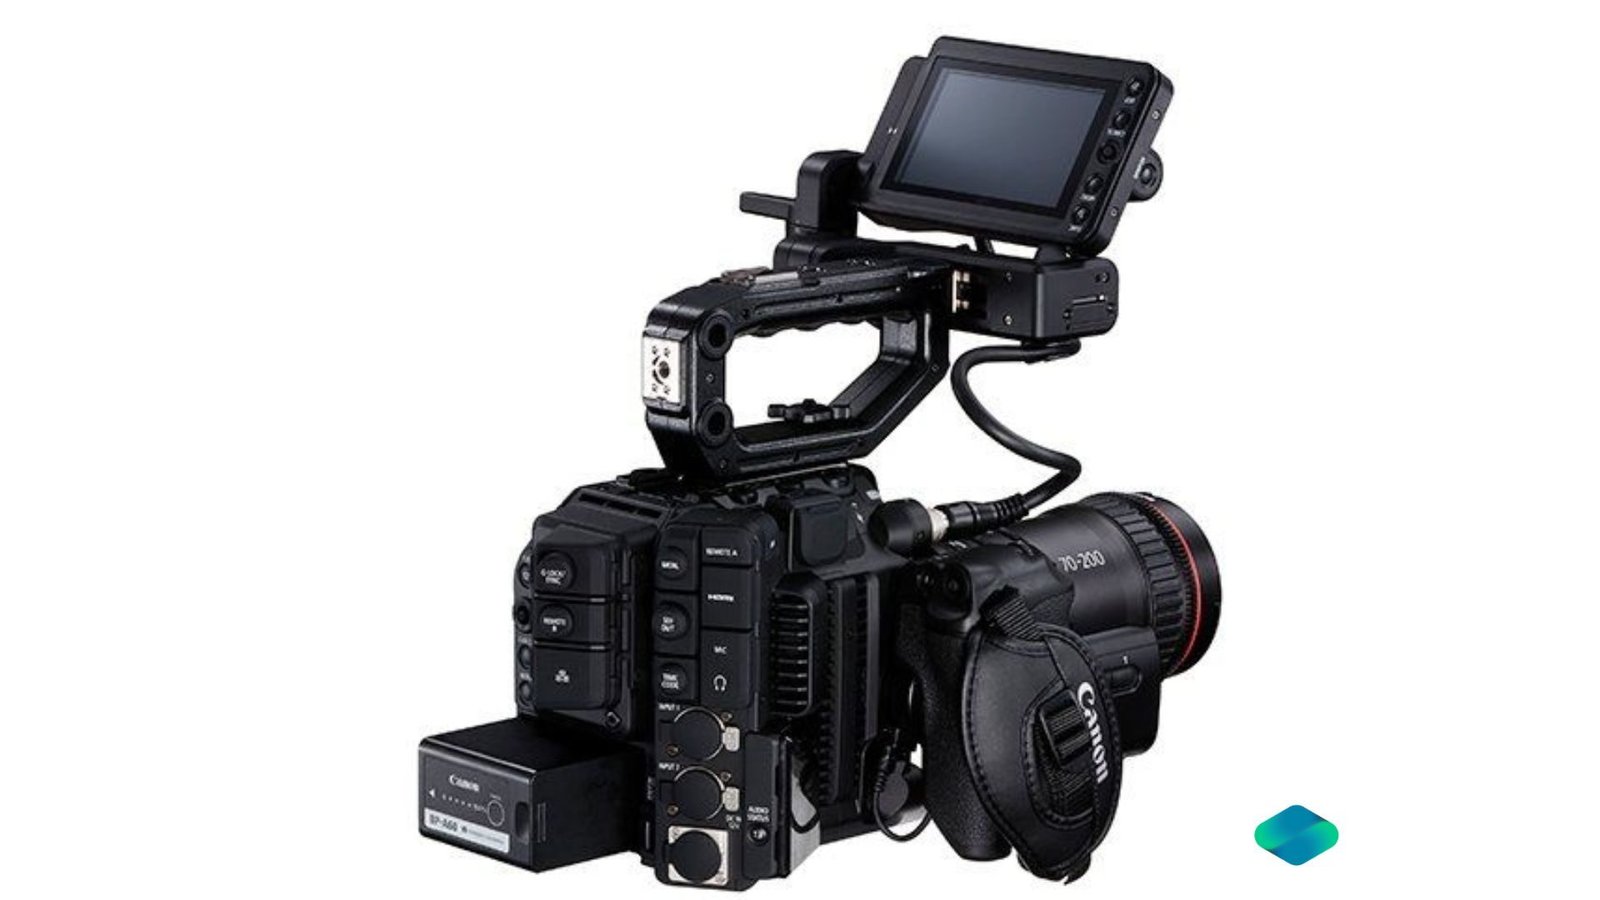 Rent Canon C-300 Mark III Camera with Cp.2 Lens Kit in Delhi NCR, Rent Canon EOS R-5 Mirror Less 8K Camera with Cp.2 Lens Kit in Delhi NCR, Camera accessories, Camera lenses for rent, in Delhi Gurgaon Noida, hire Shooting equipment, Lighting equipment rental, Film gear rental for Video production, camera rental company in Delhi, film equipment rental company